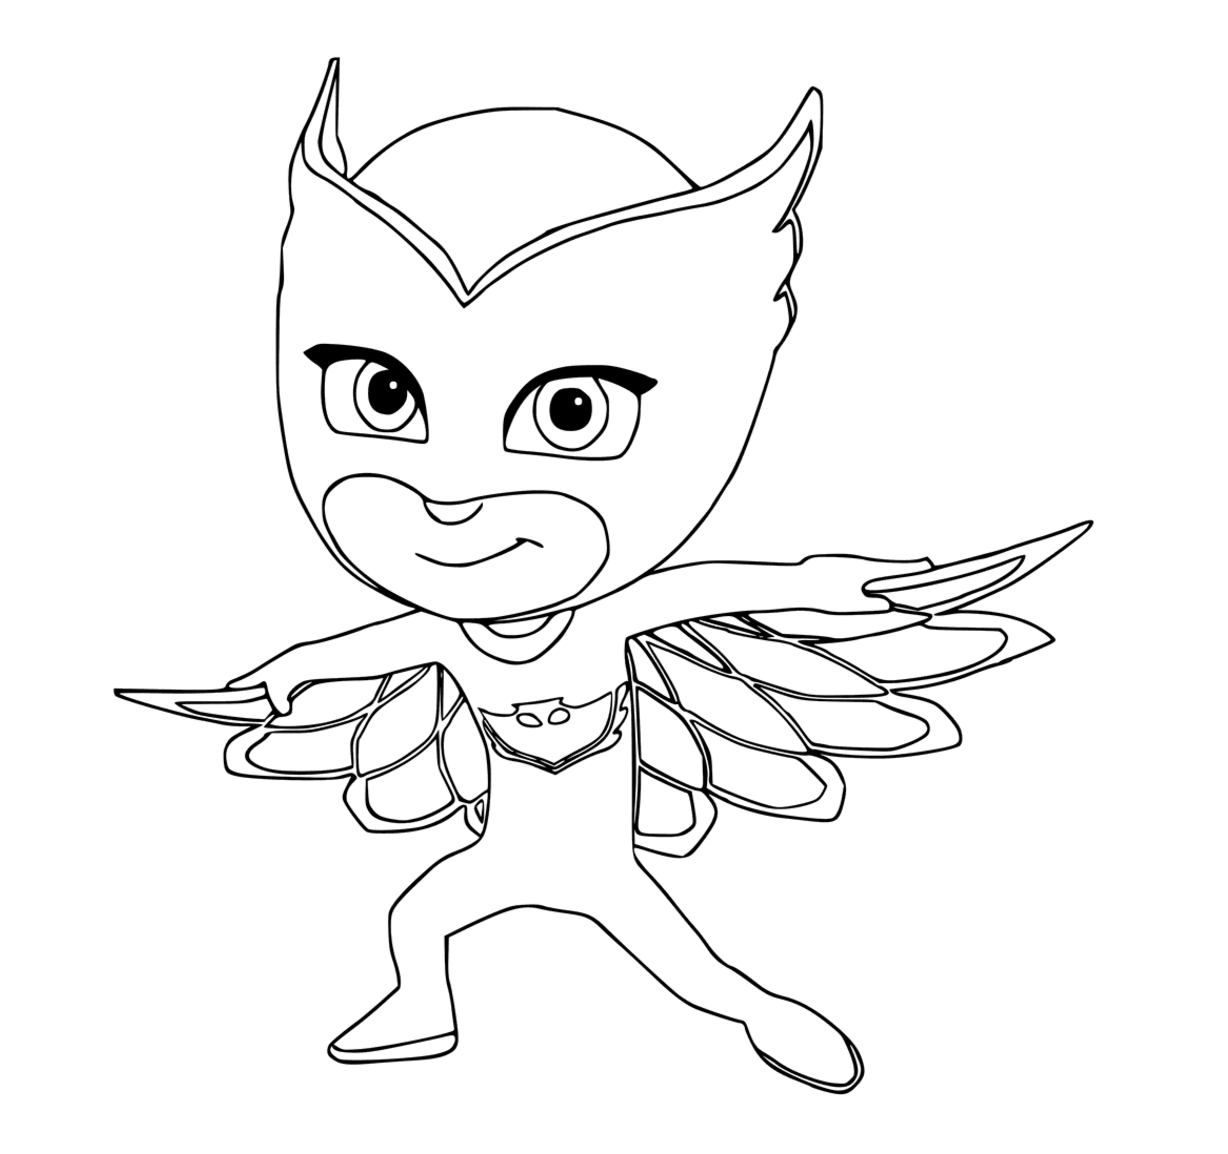 Owlette Colouring Page - Coloring Home